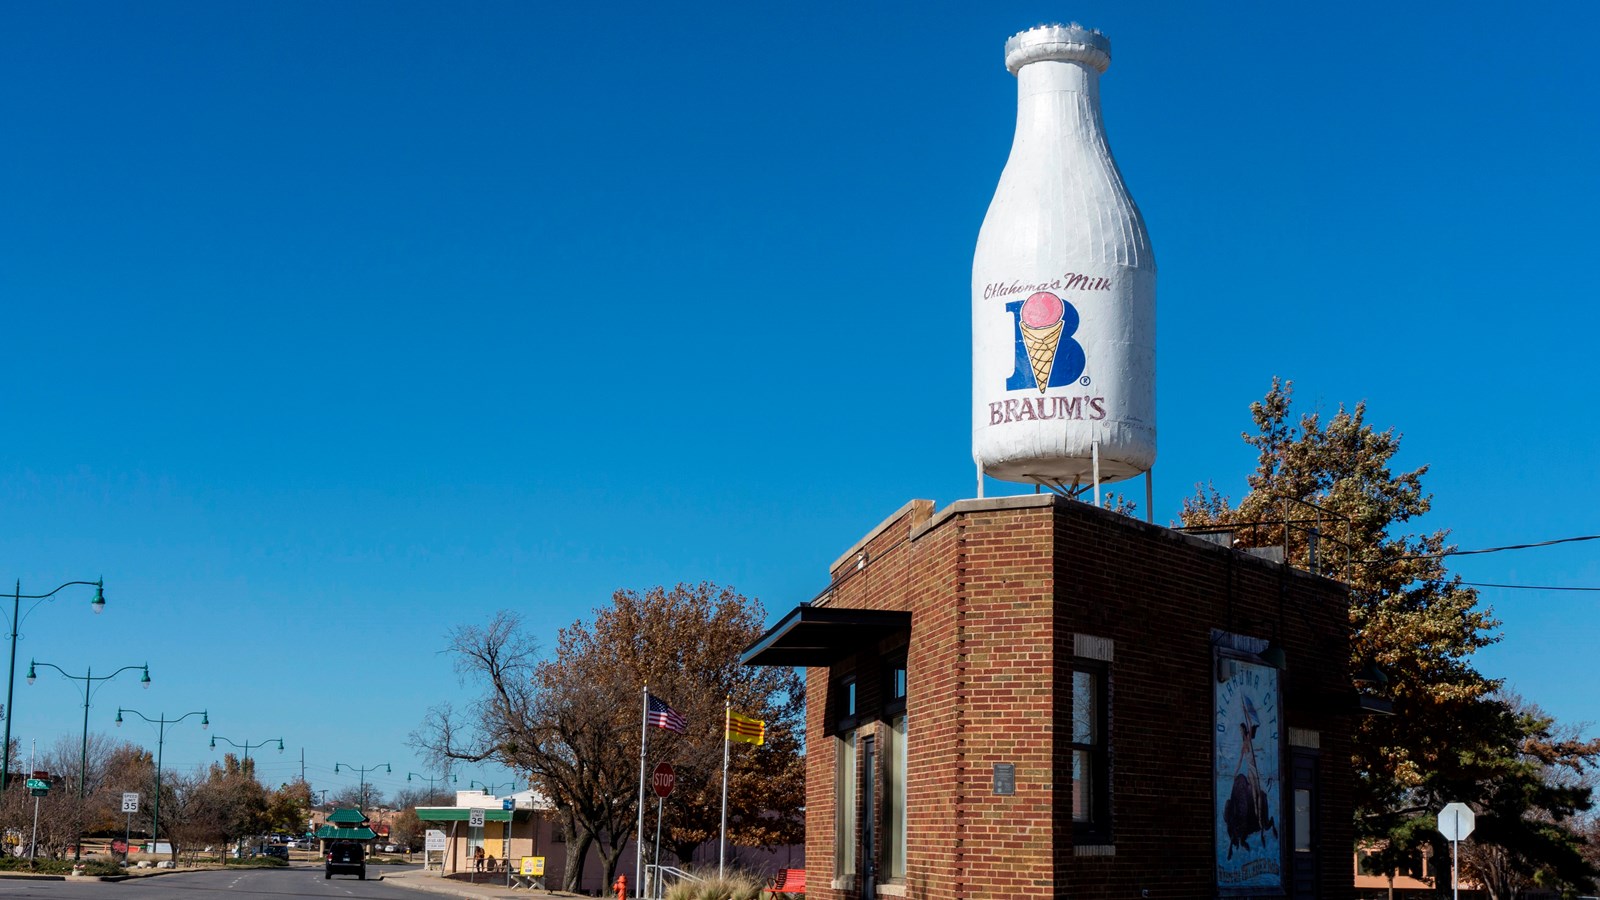 A small triangular brick building with a large milk-bottle sculpture on the roof.